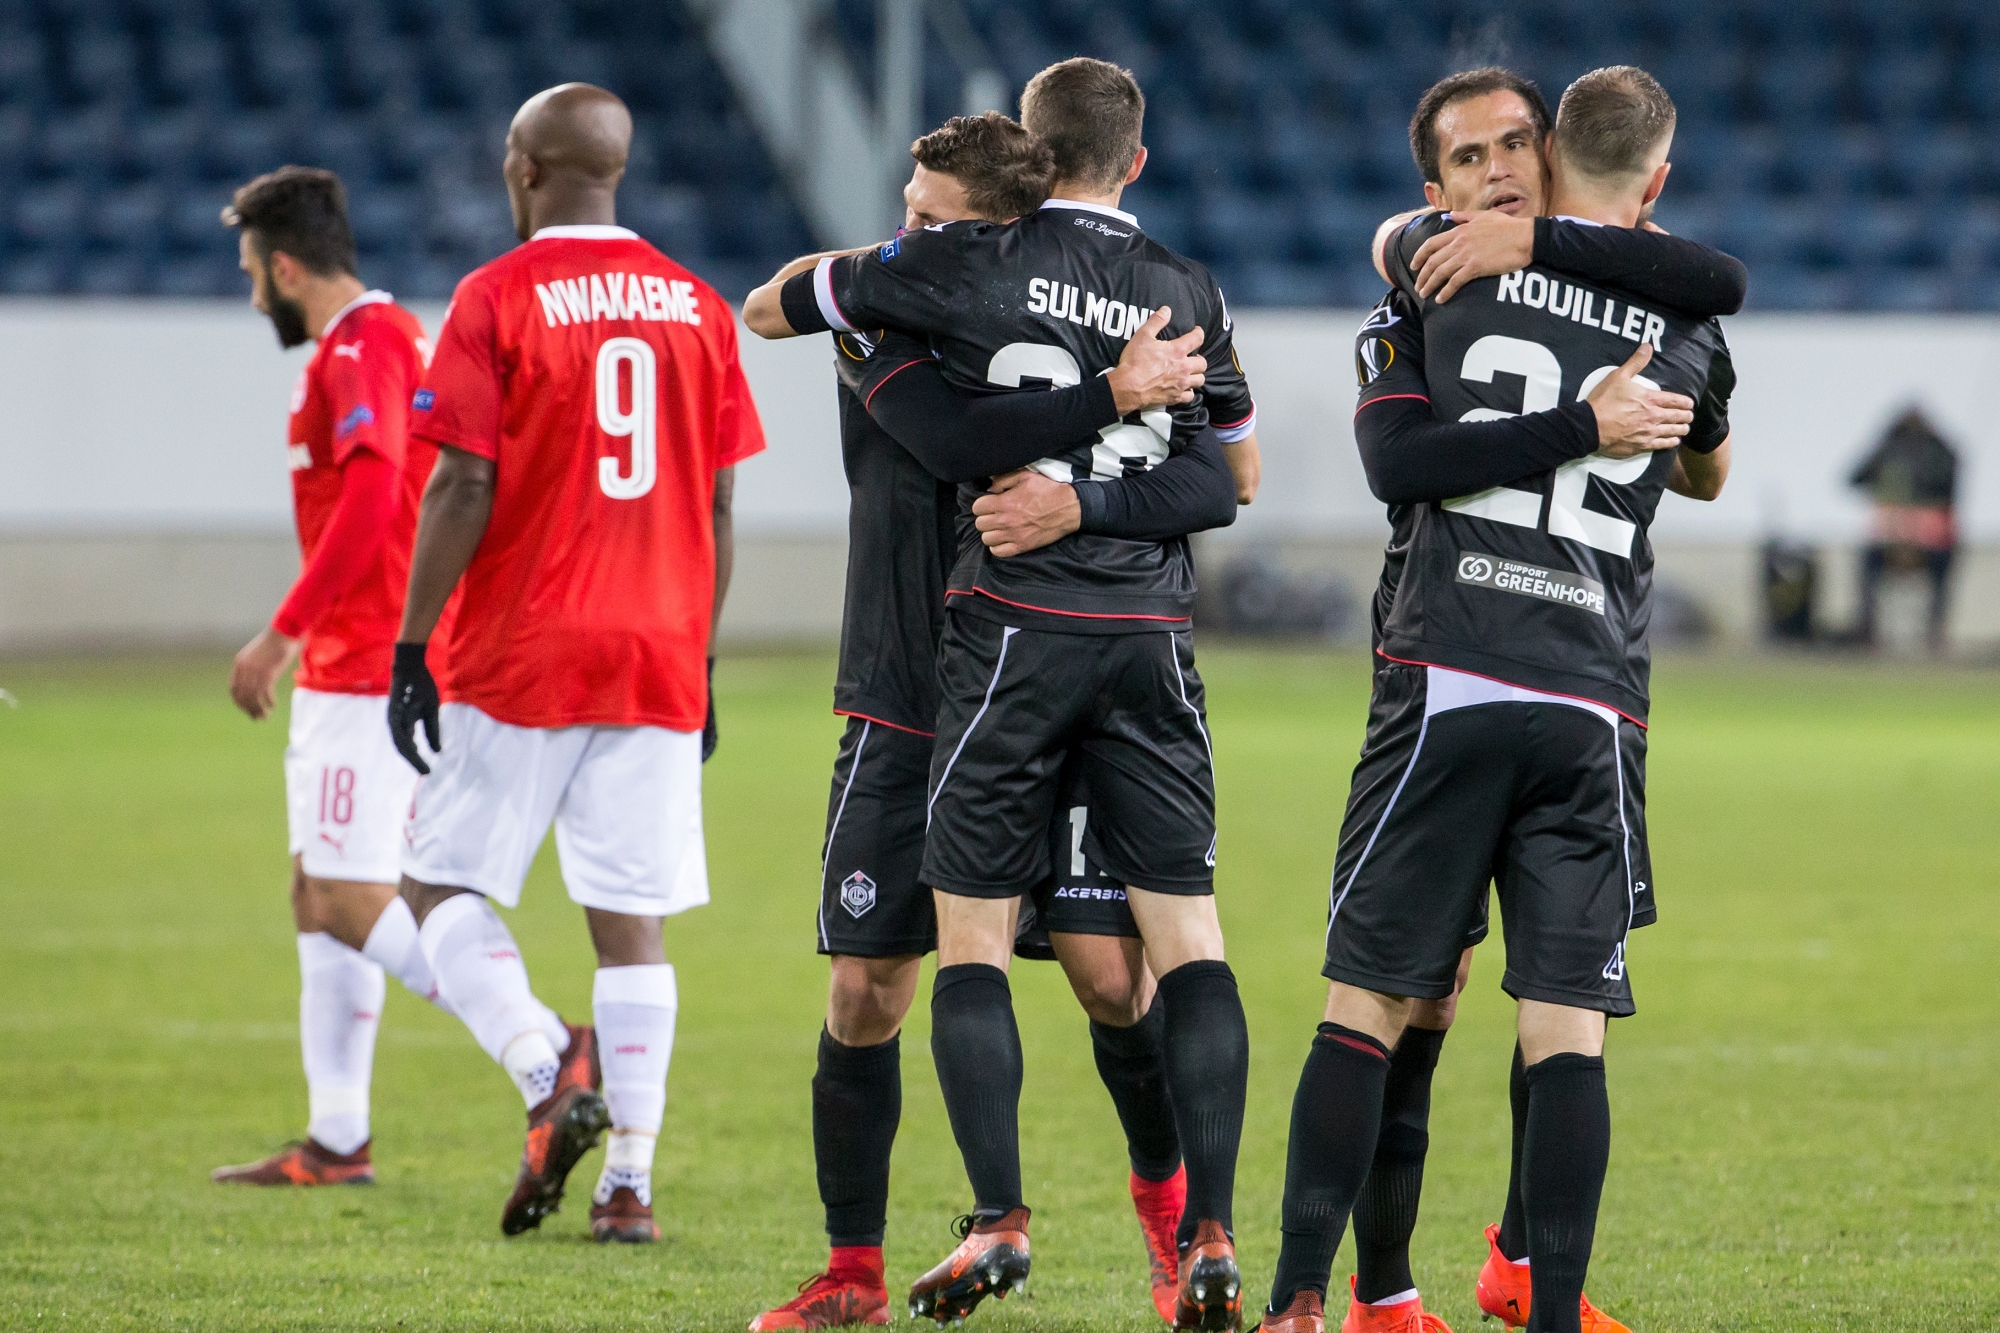 Players of FC Lugano celebrate during the UEFA Europa League Group G round five match between FC Lugano of Switzerland and Hapoel Beer-Sheva of Israel, at the swisspor Stadion in Lucerne, Switzerland, on Thursday, November 23, 2017.  (KEYSTONE/Alexandra Wey) SWITZERLAND SOCCER EUROPA LEAGUE LUGANO BEER-SHEVA